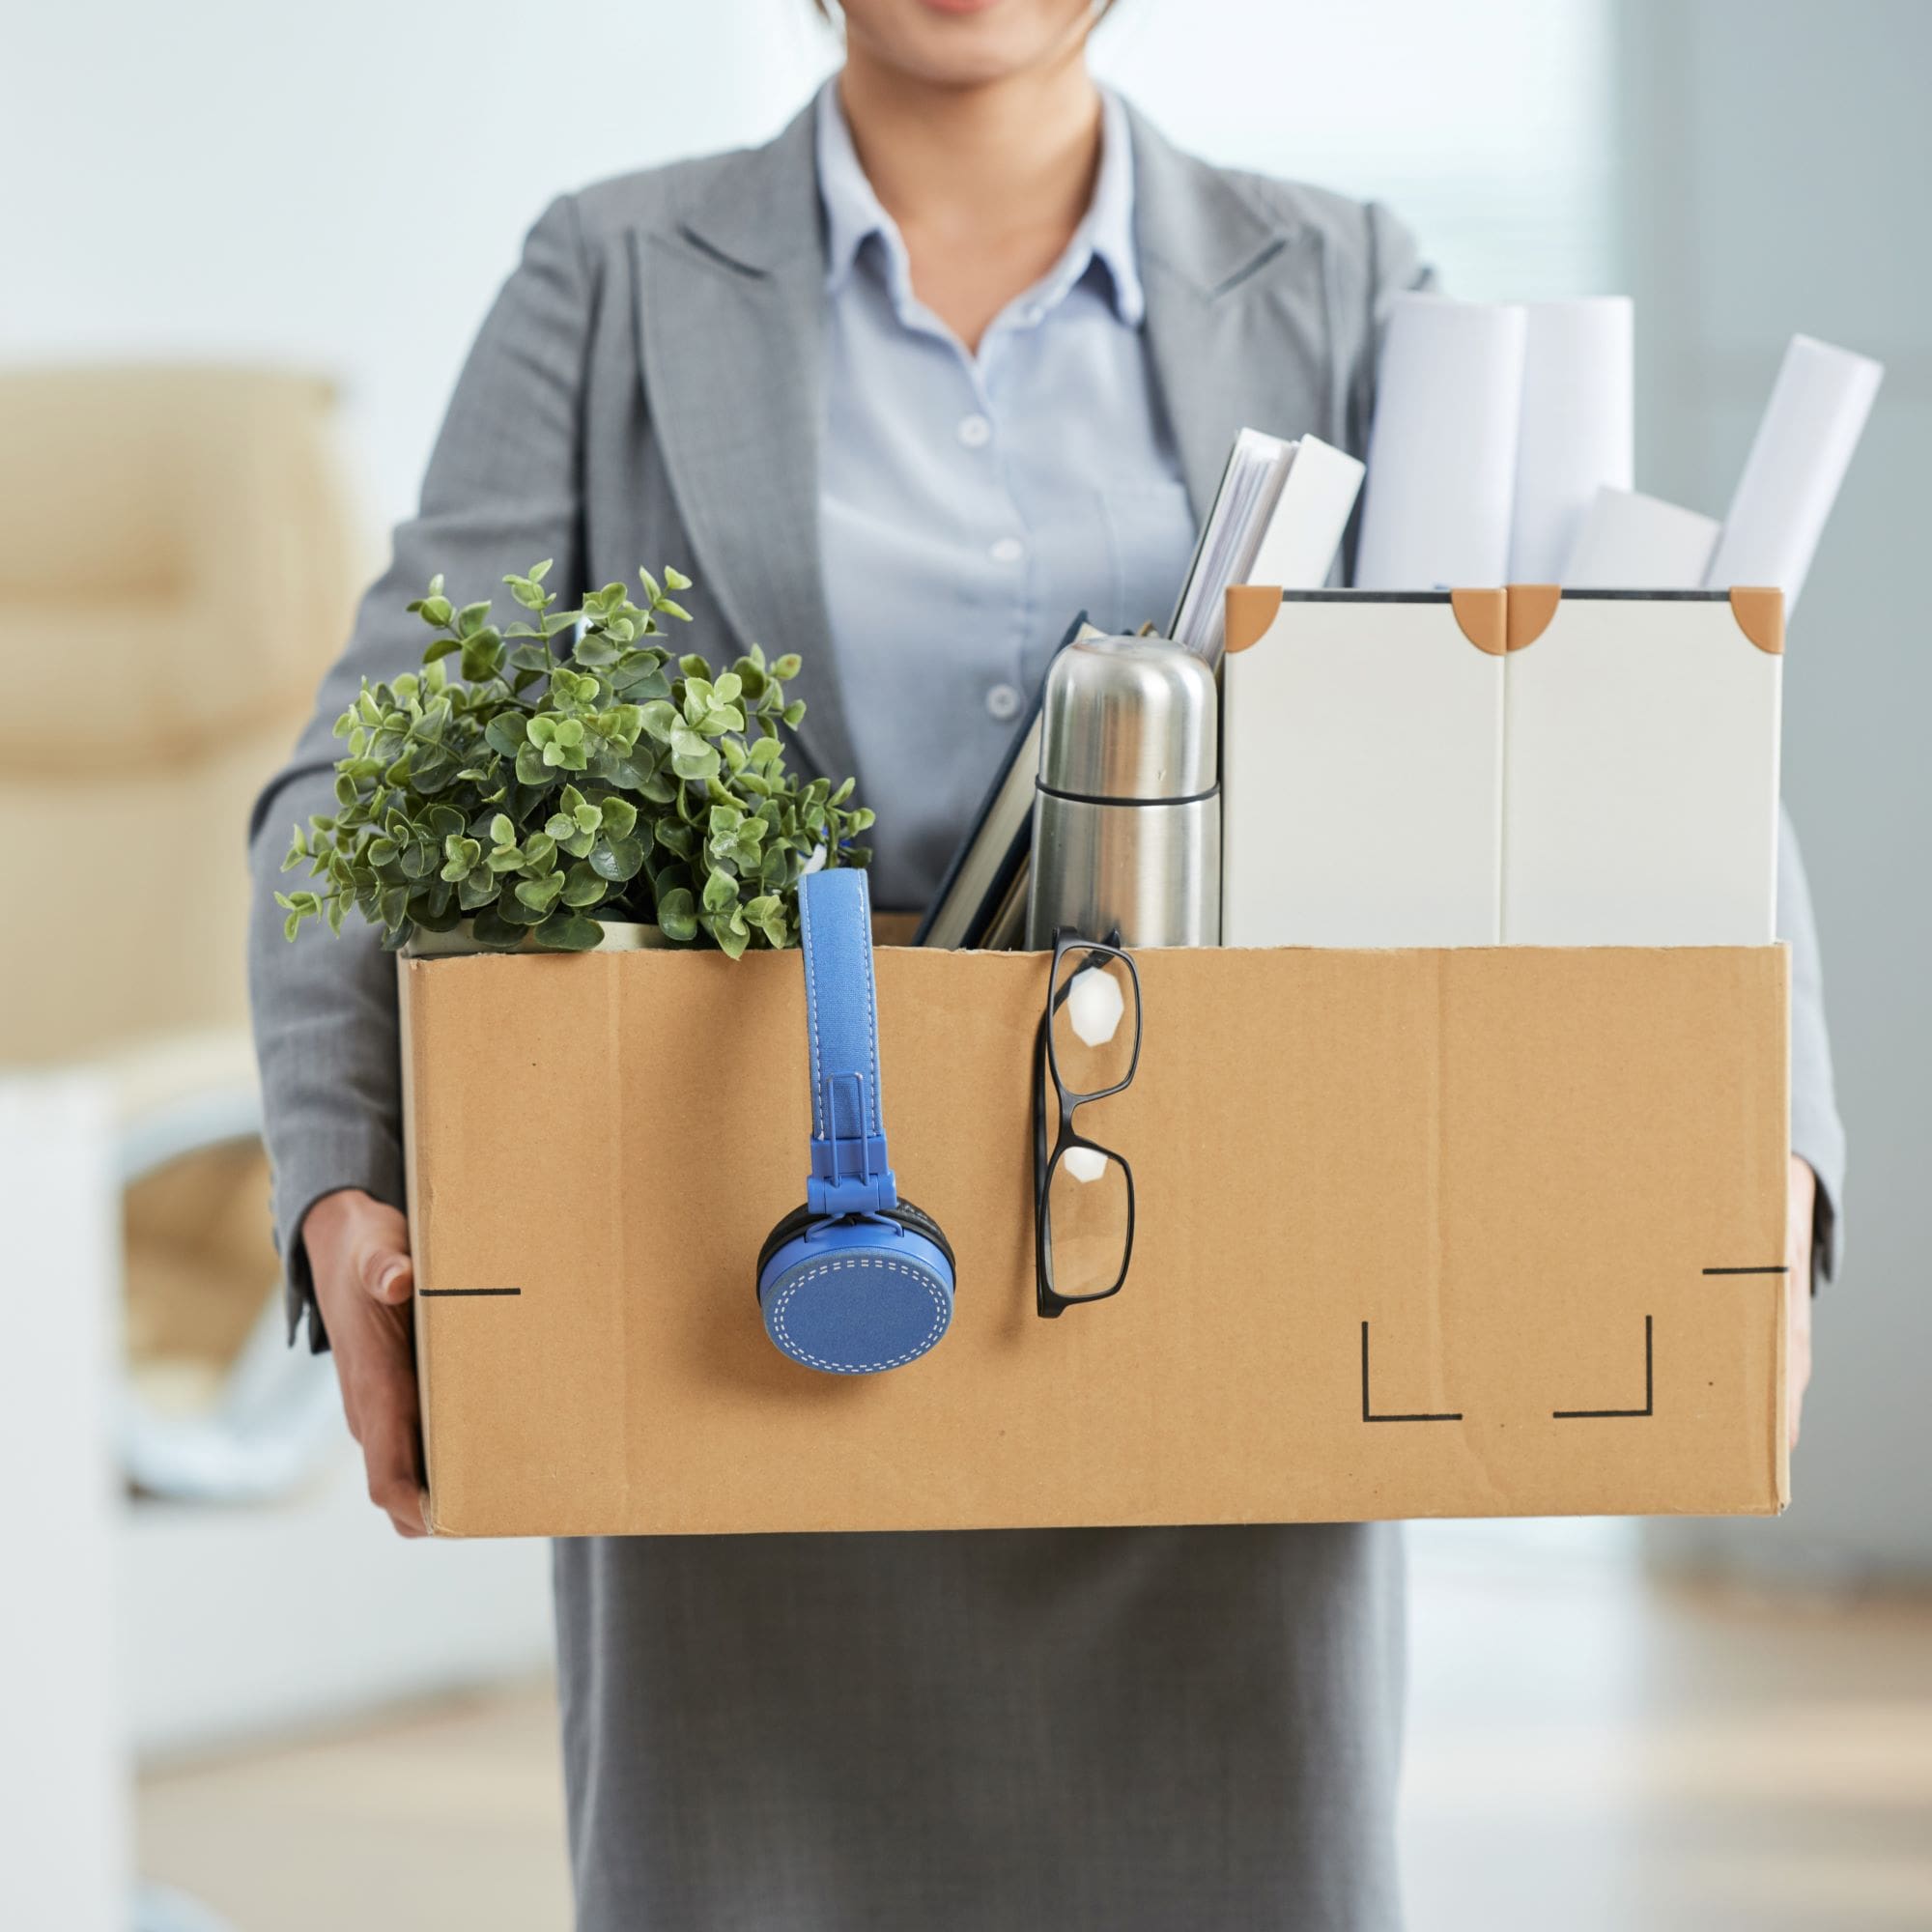 A businesswoman carrying a box to move into a new office